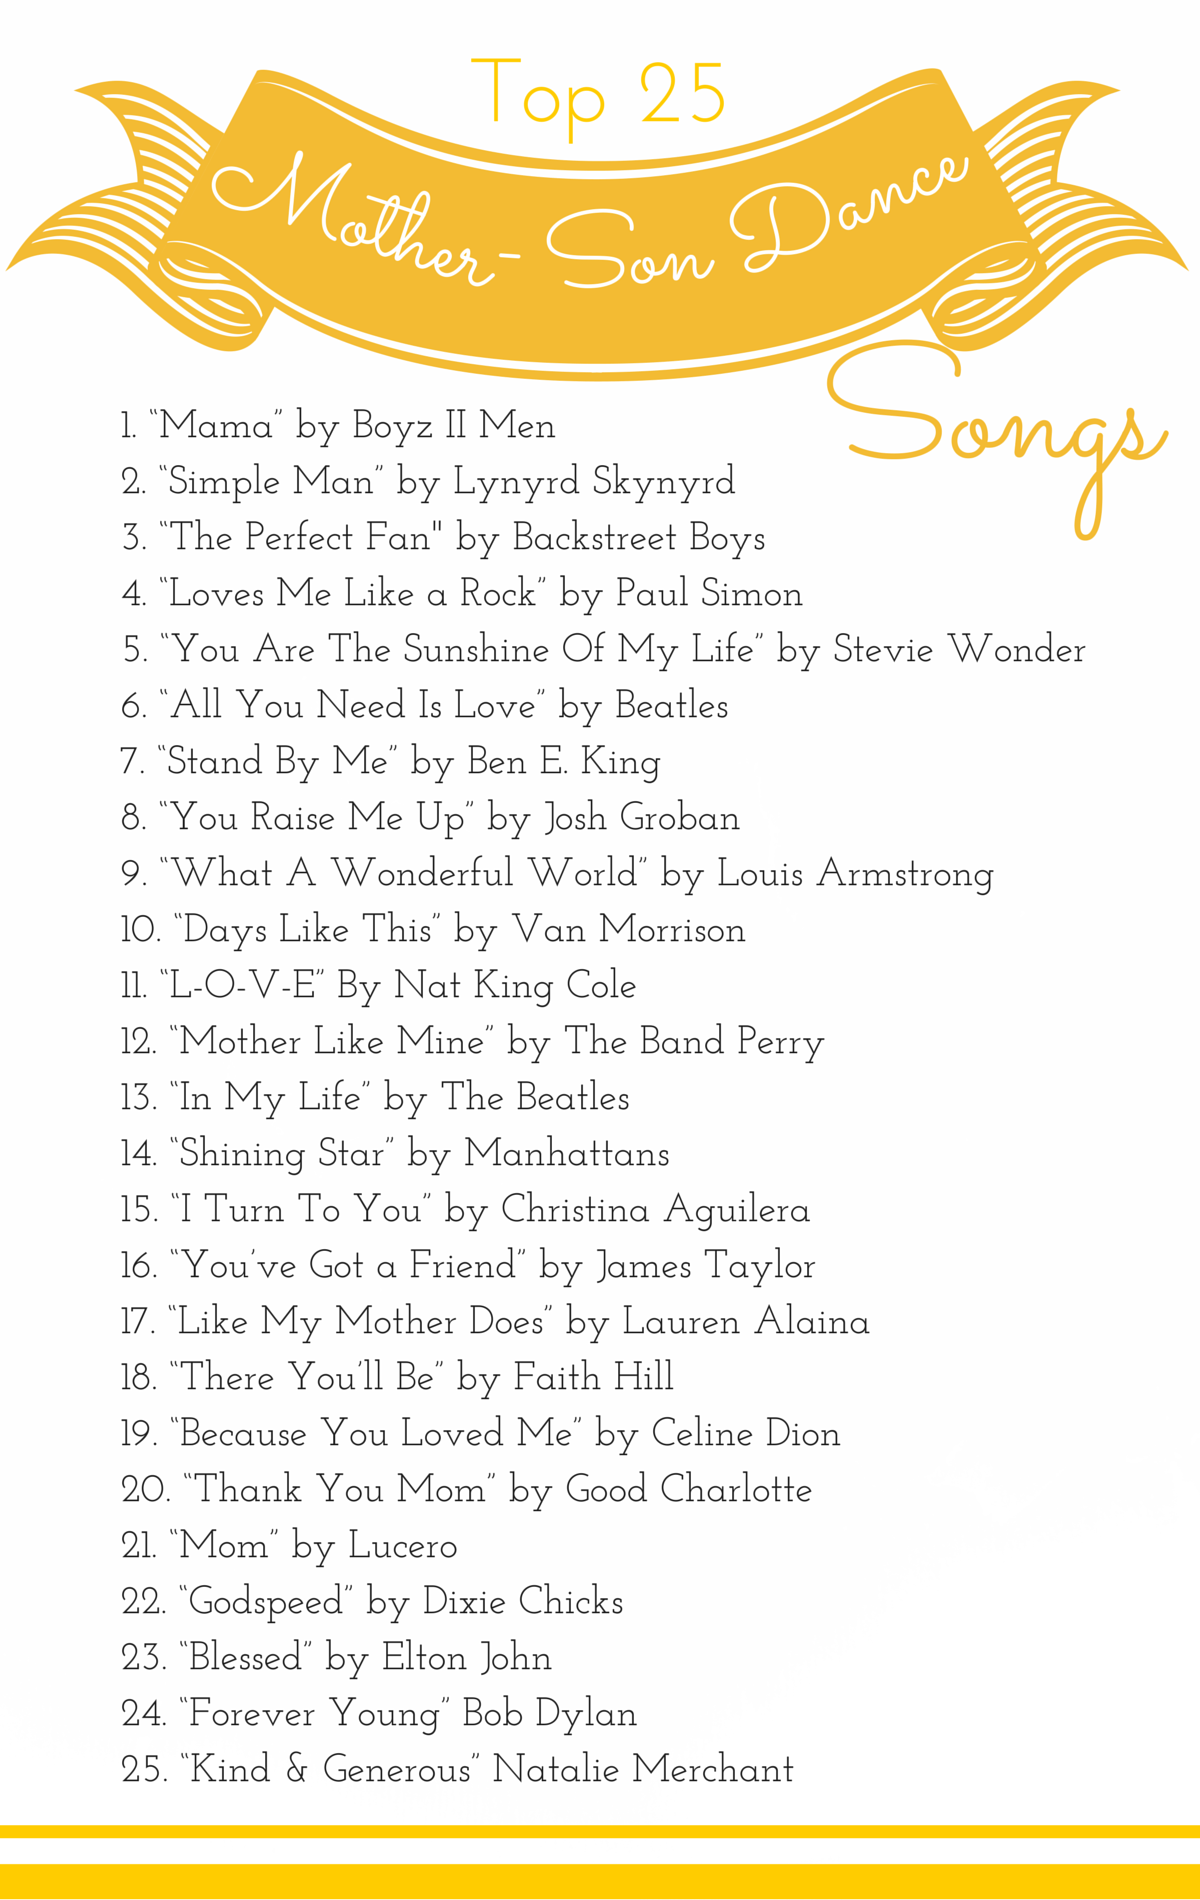 Mother and Son Songs: 60 of the Best Mother and Son Wedding Songs -   